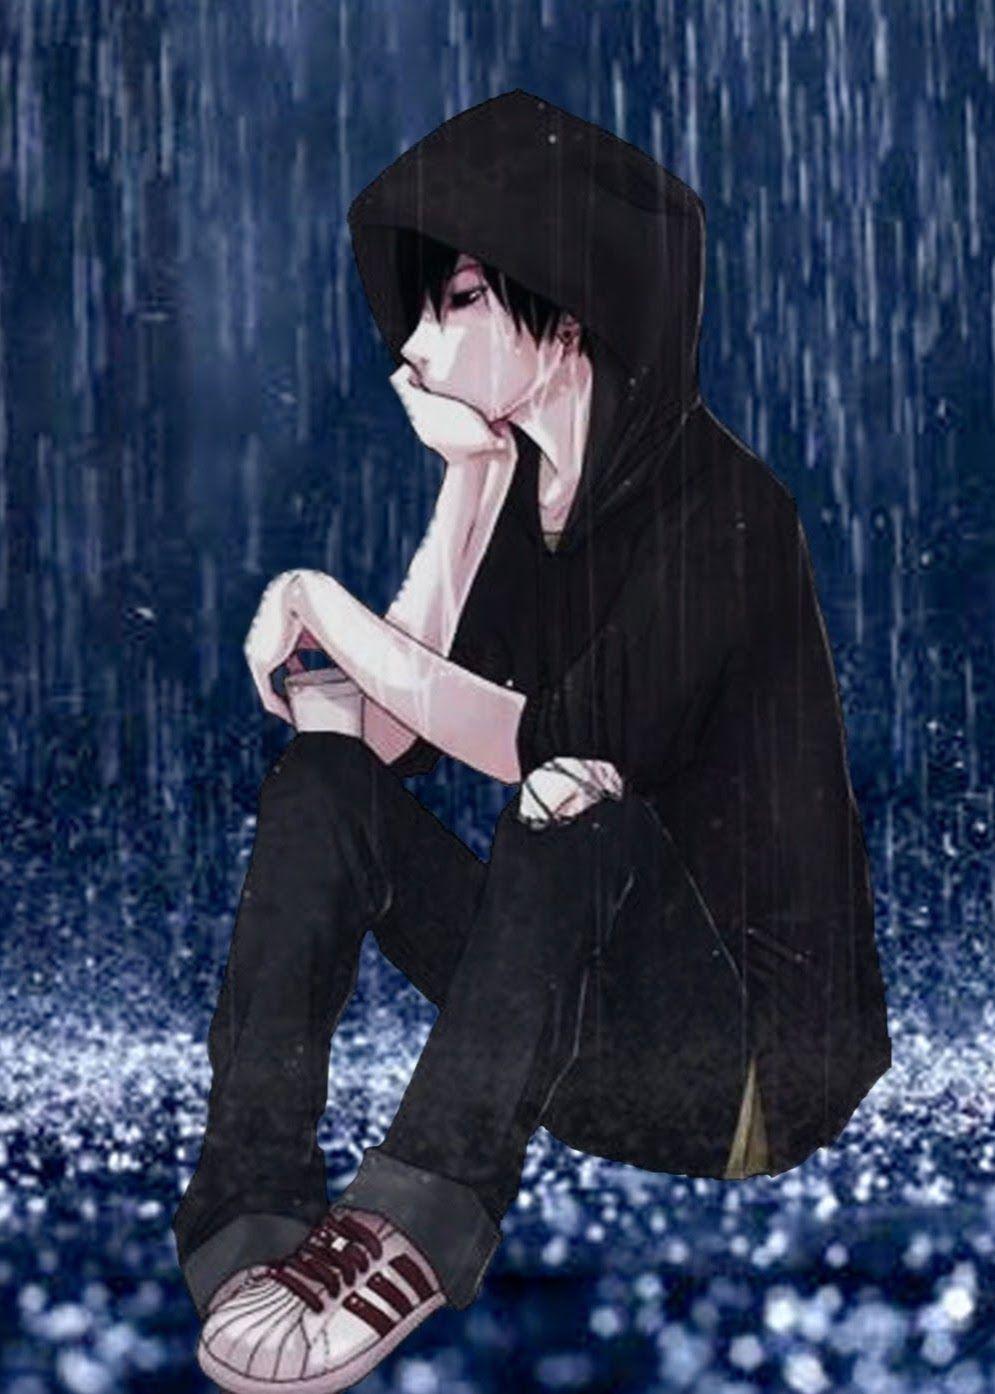 Image Result For Sad Anime Boy Crying In The Rain Alone HD